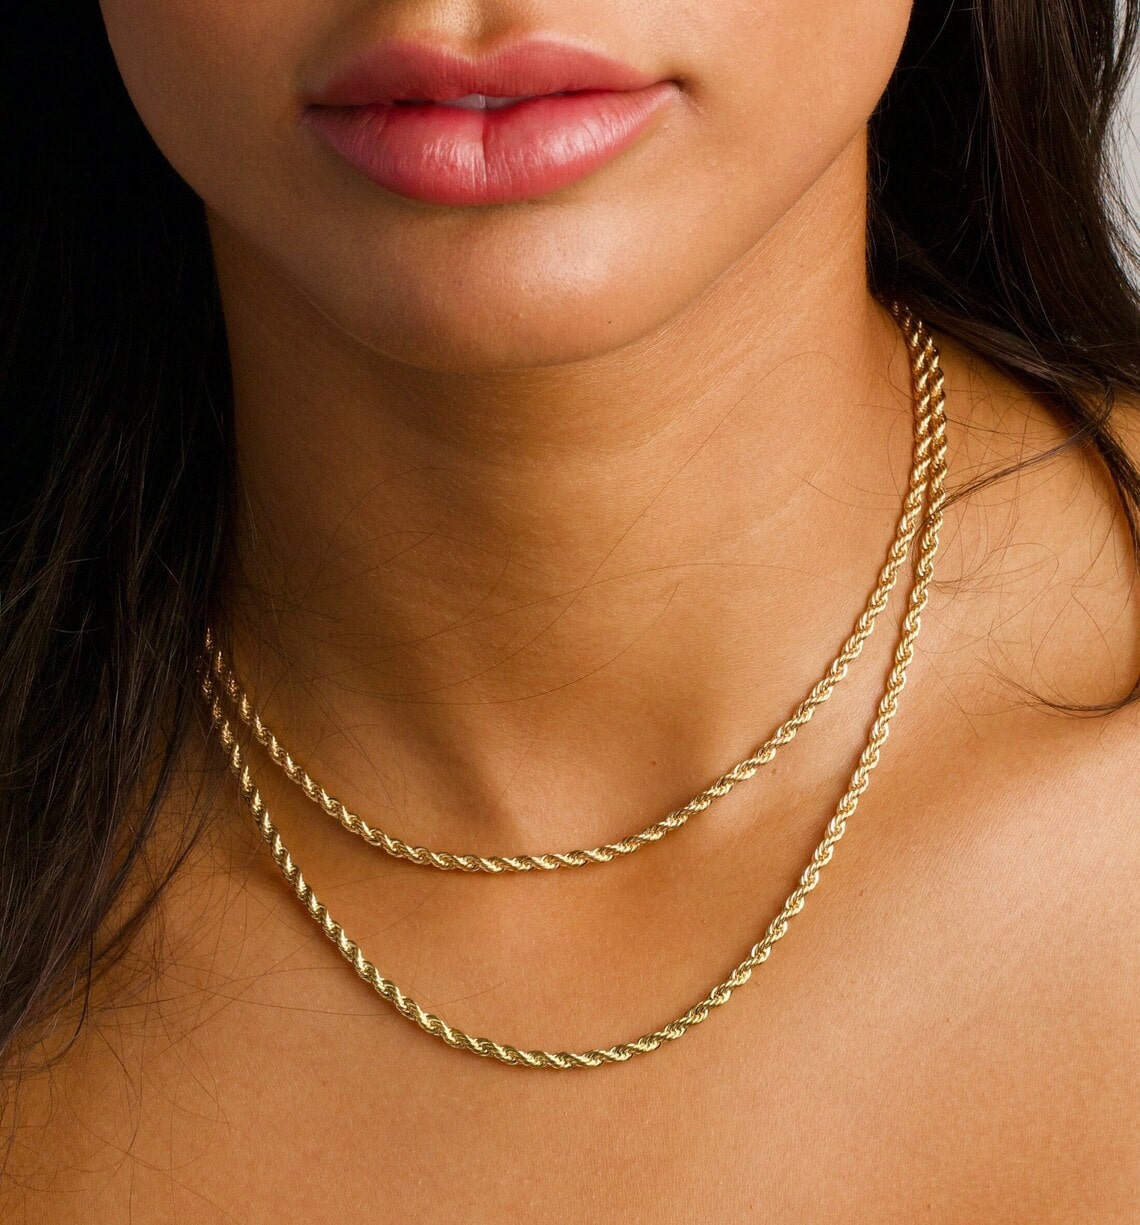 gold rope chain necklaces on the woman's neck